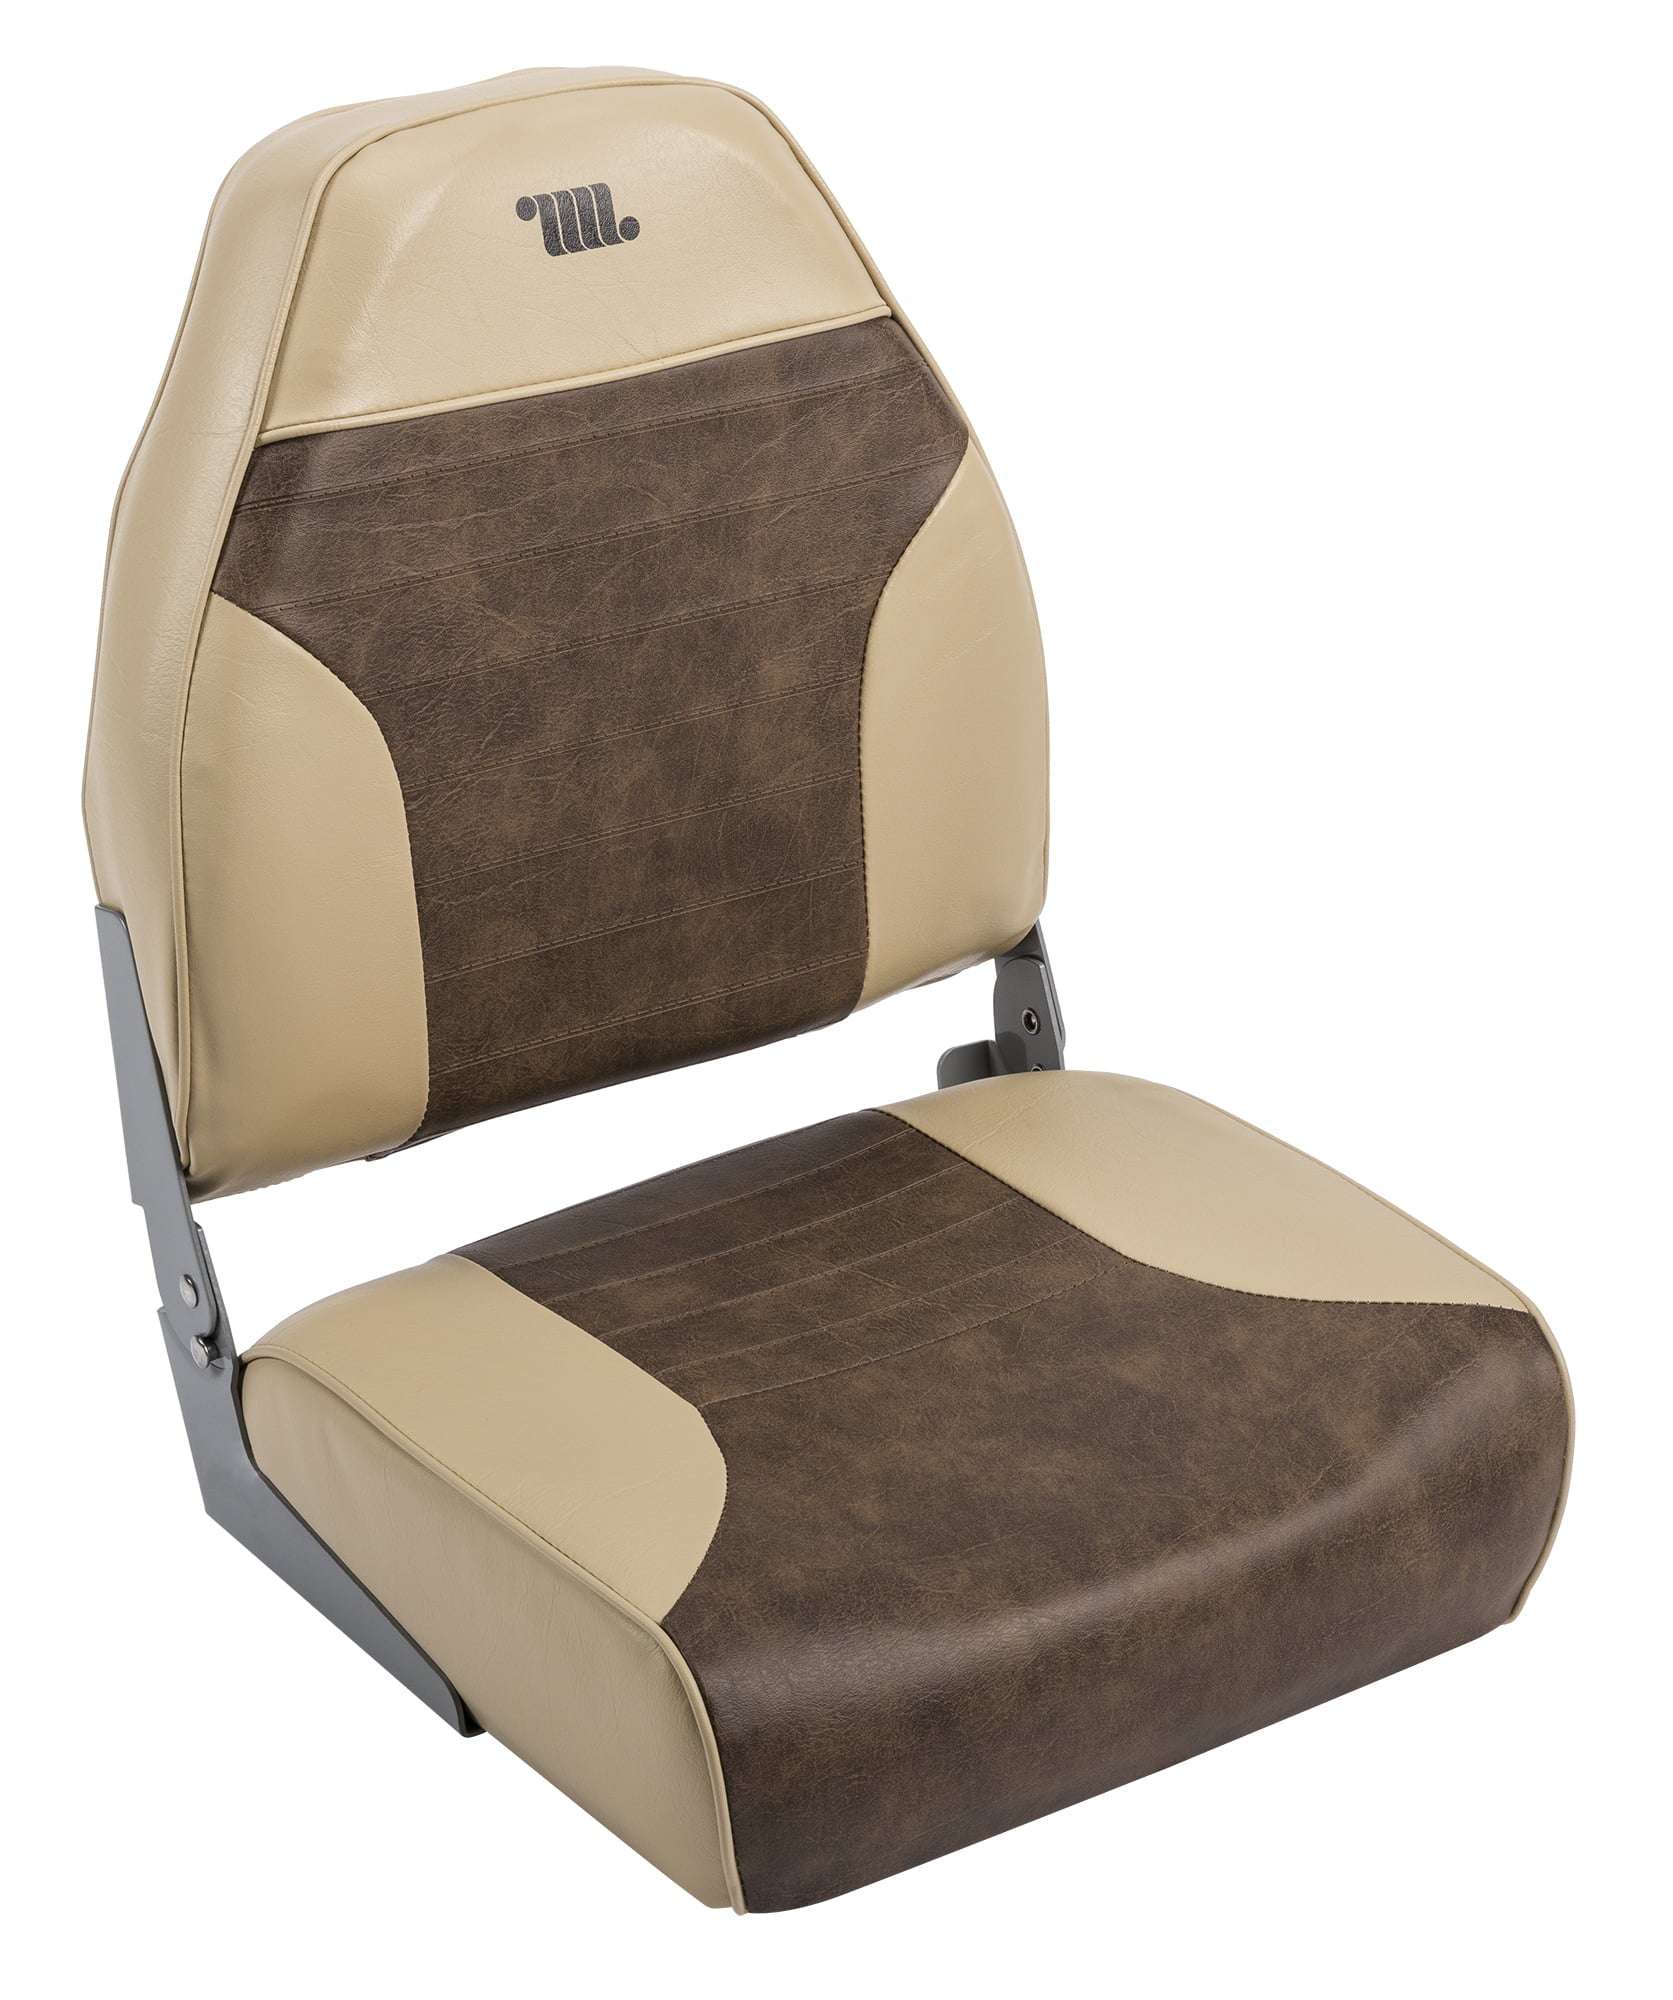 Wise 8WD588PLS-662 Standard High Back Boat Seat， Sand / Brown